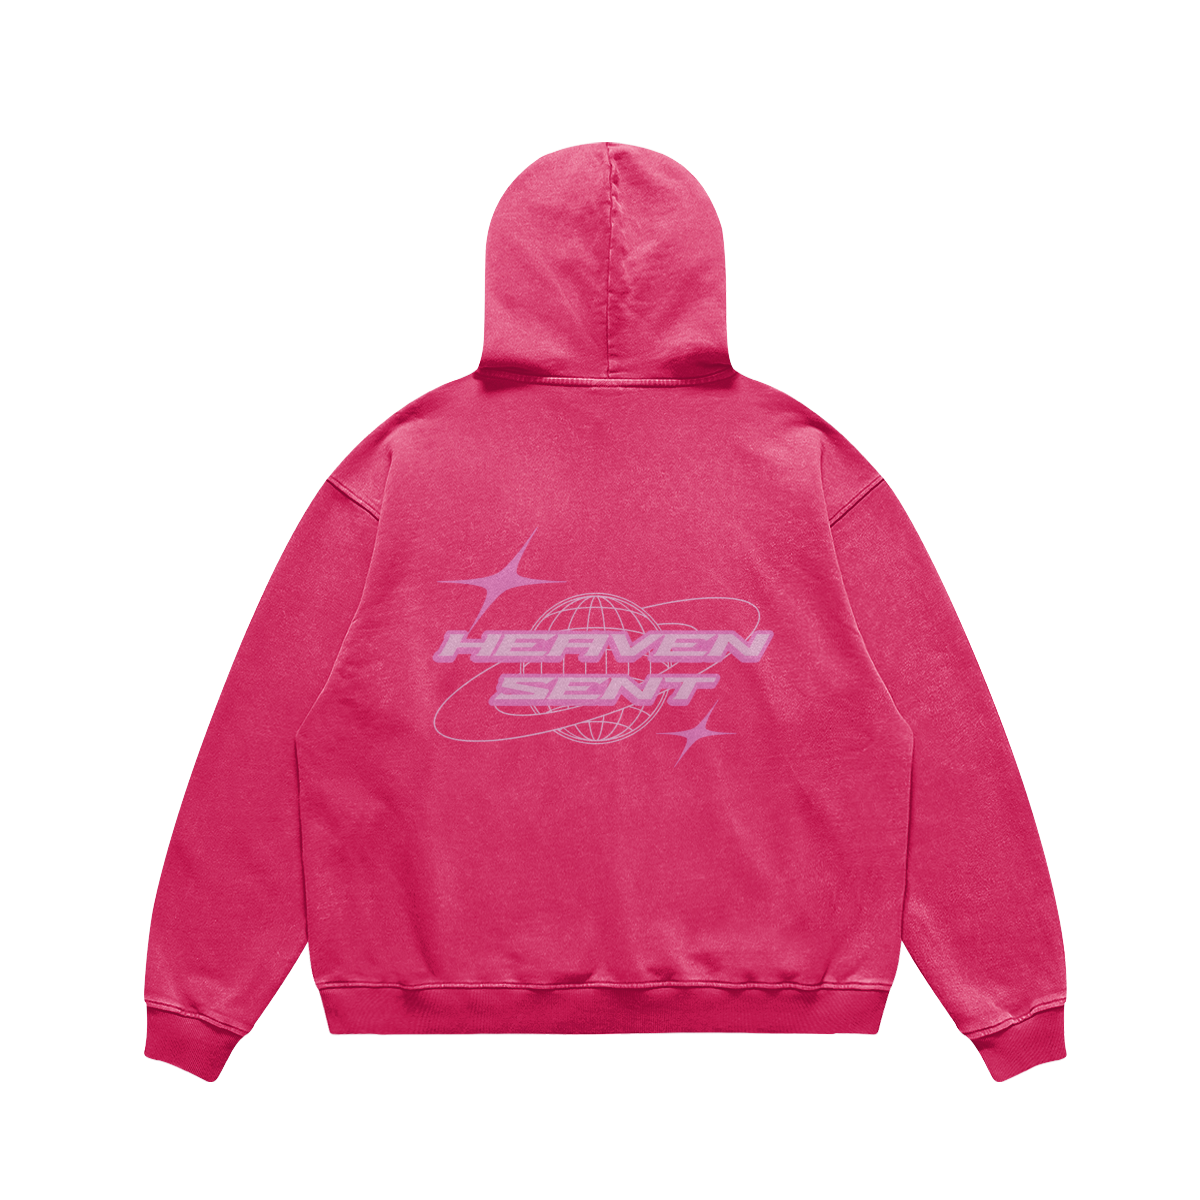 PINK CYBER LUV OVERSIZED HOODIE